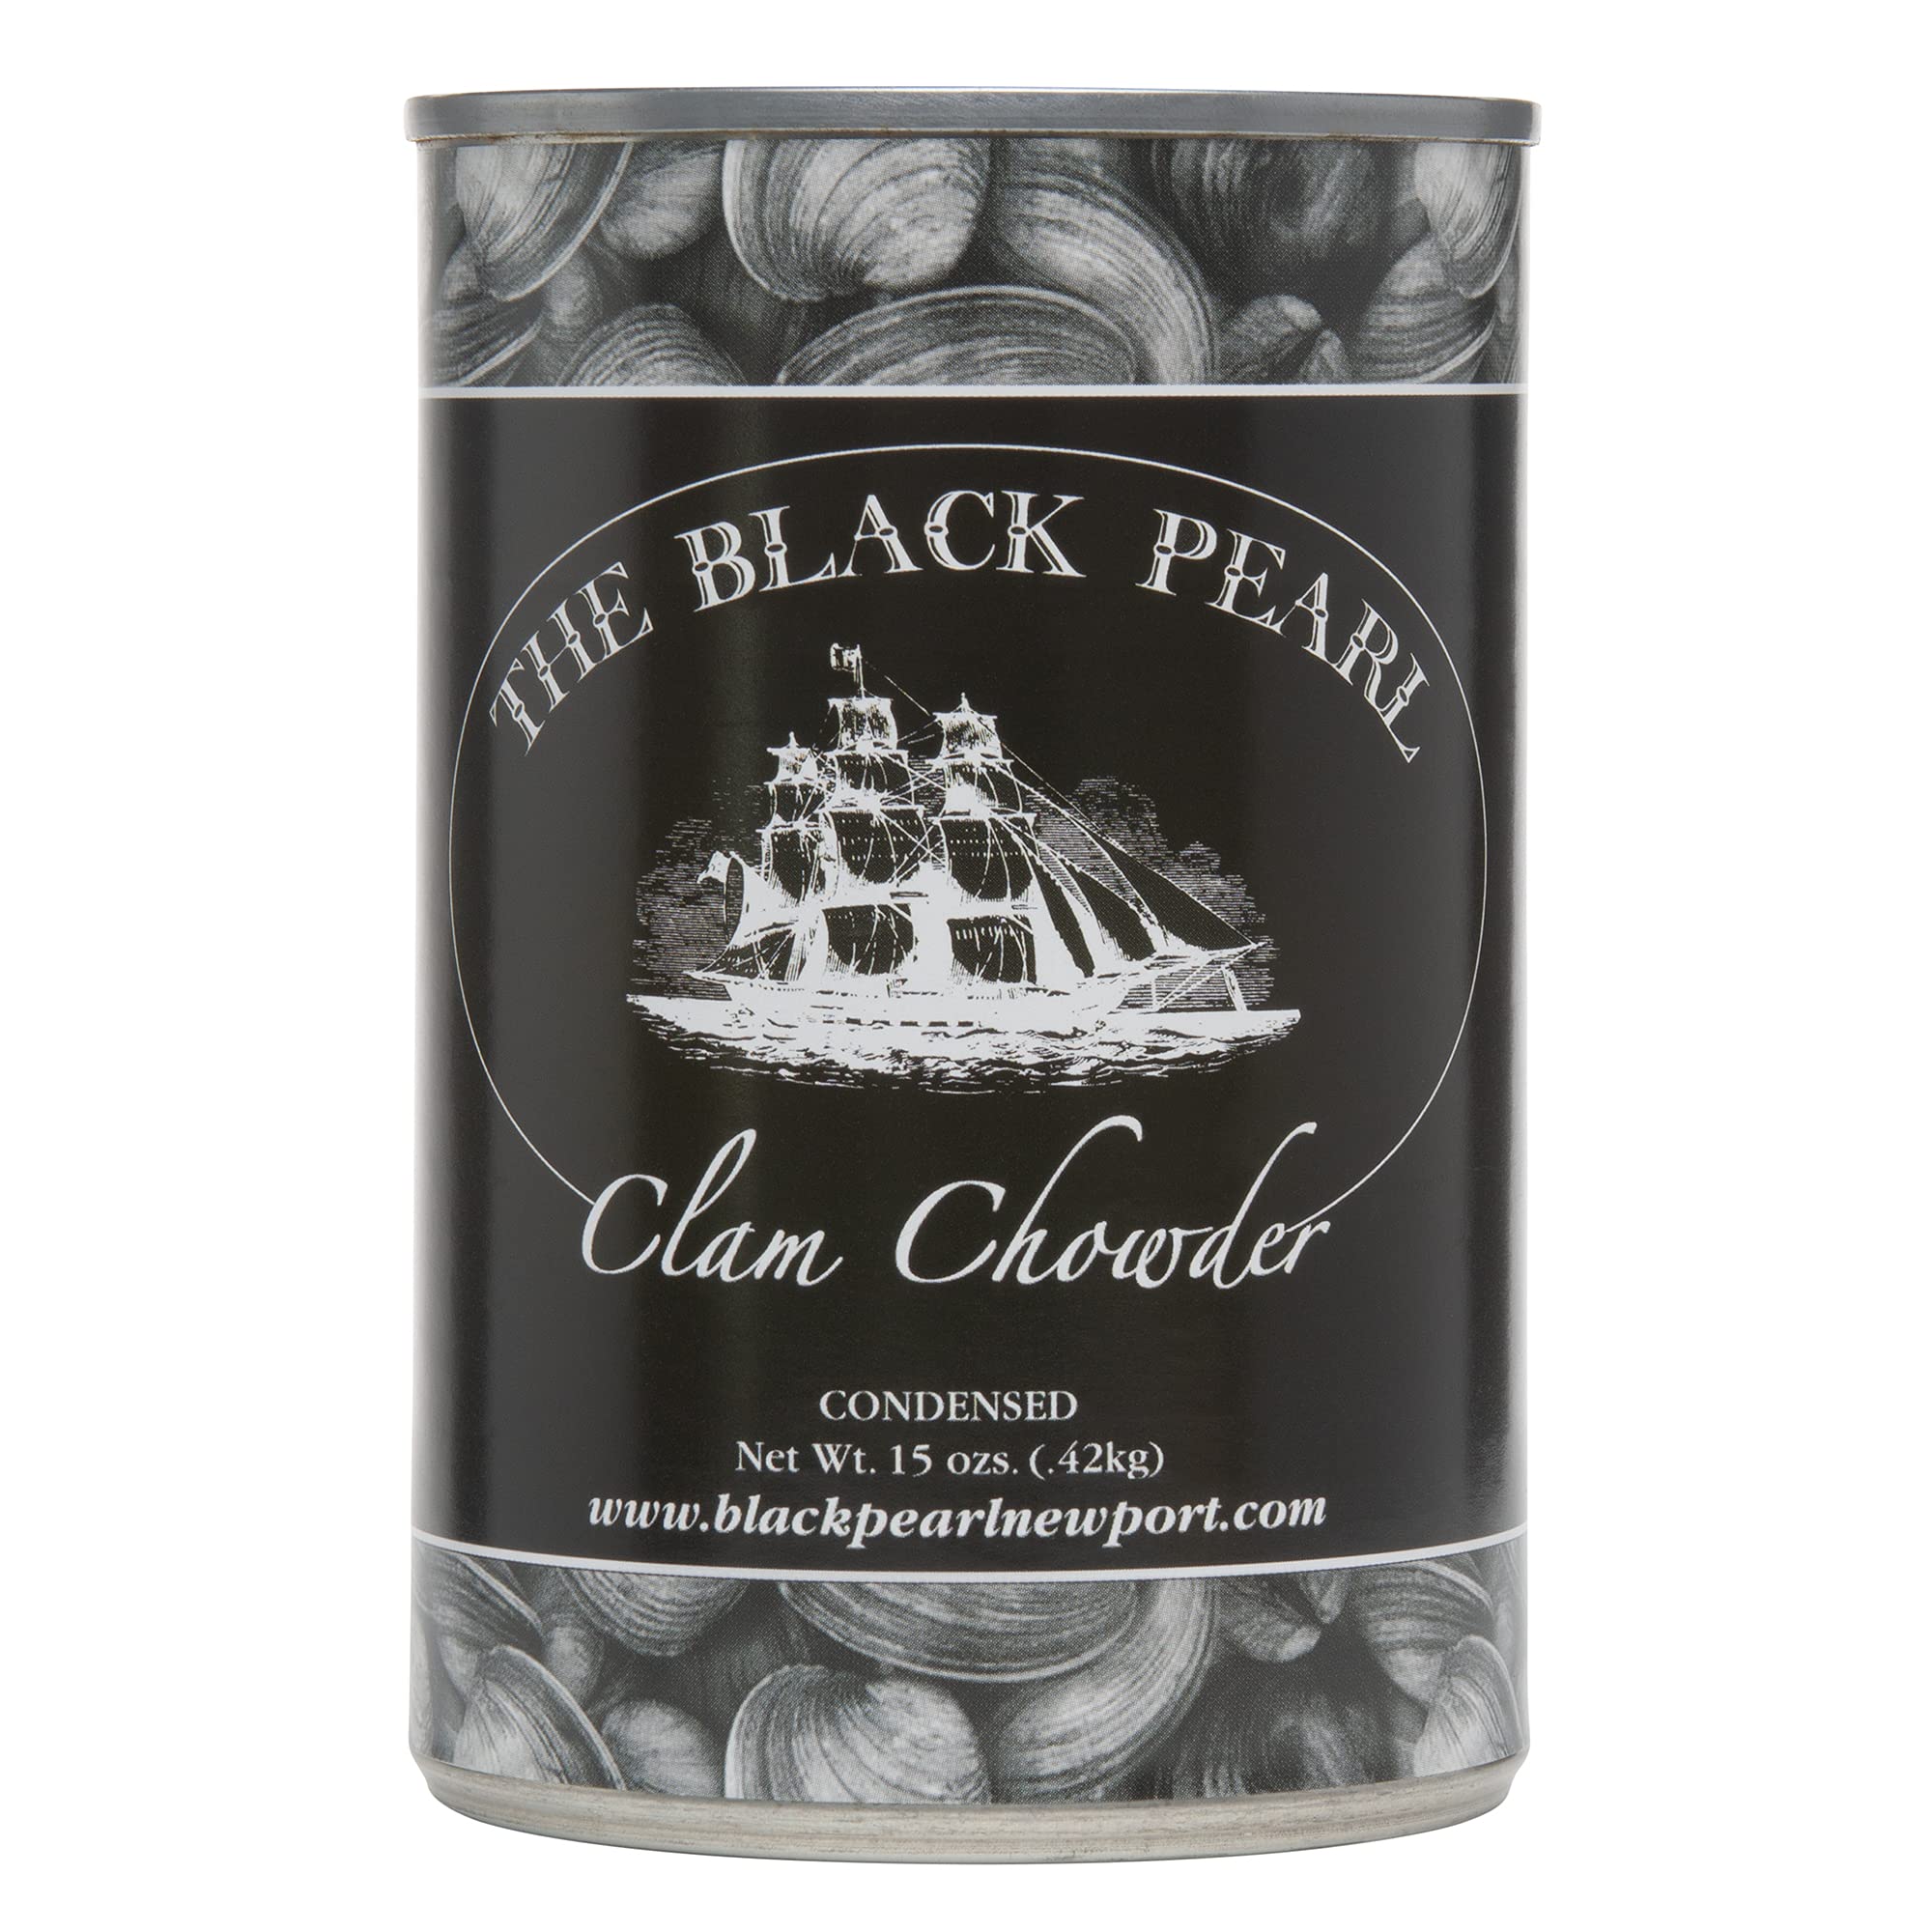 The Black Pearl Clam Chowder New England Famous Condensed Soup, 15 Ounce (12)